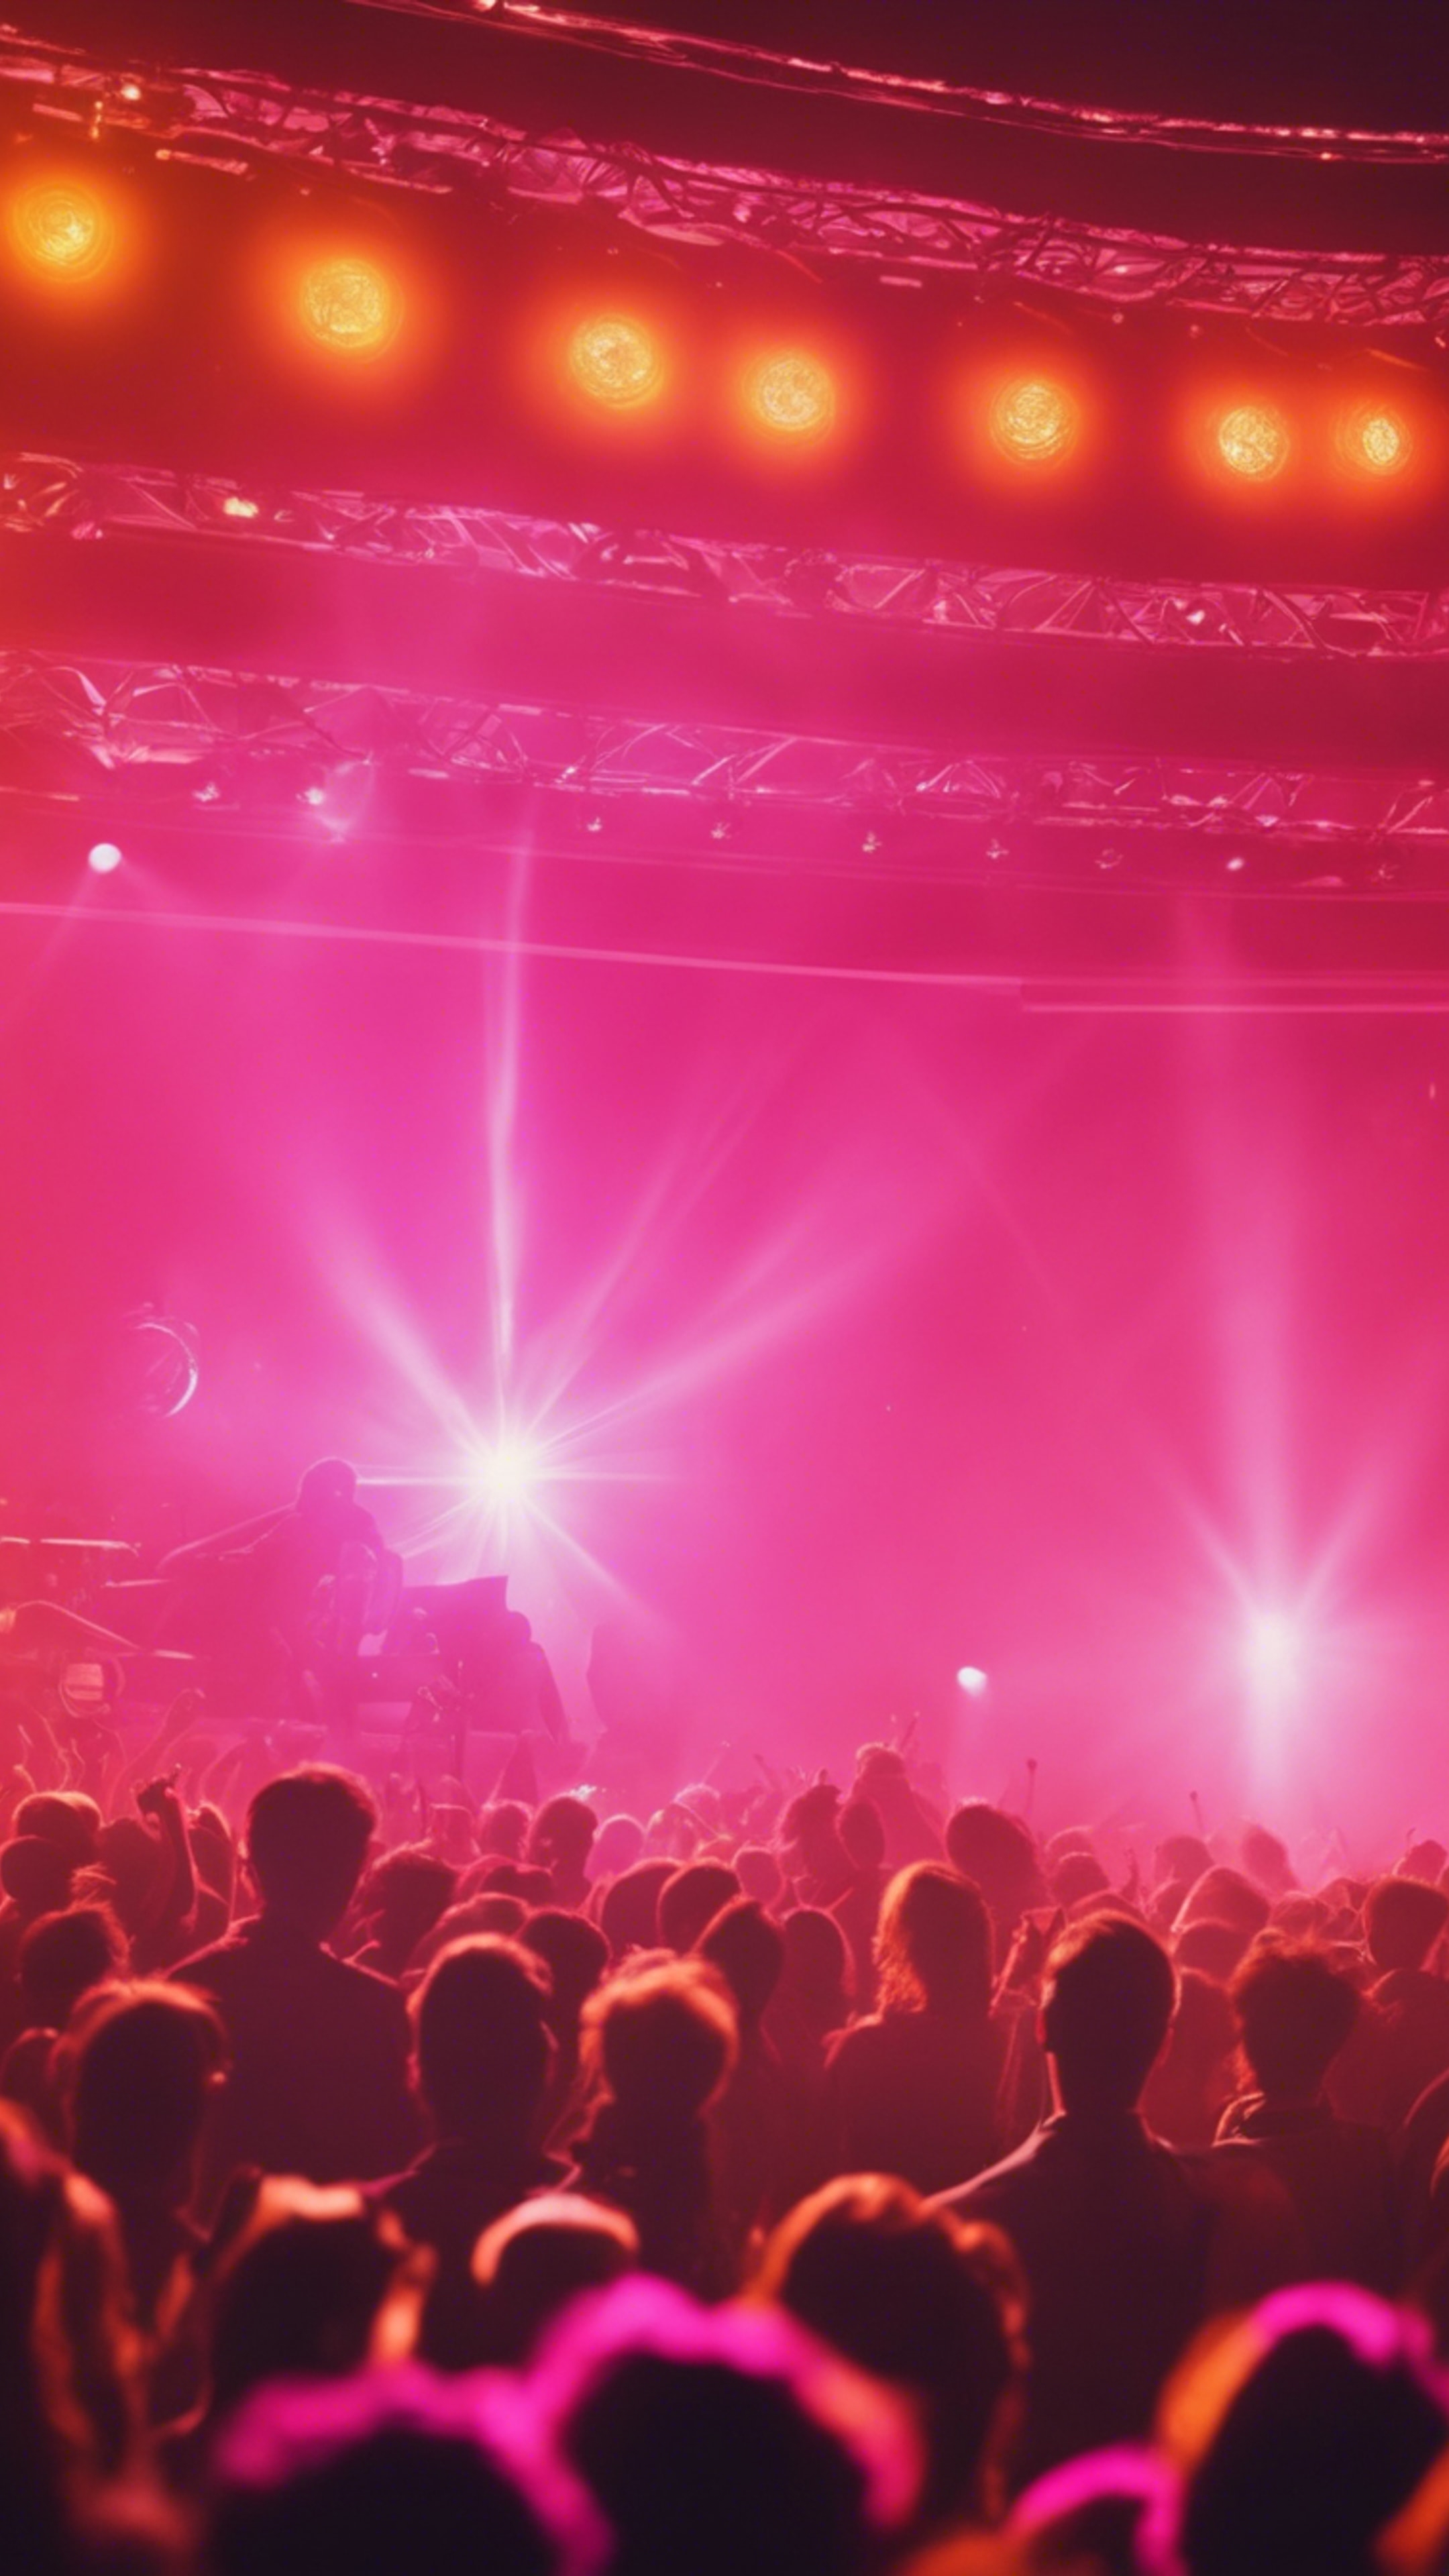 Bright orange flares from an 80s music concert with a pink stage lighting. วอลล์เปเปอร์[6011018ba8cb439fb9ea]